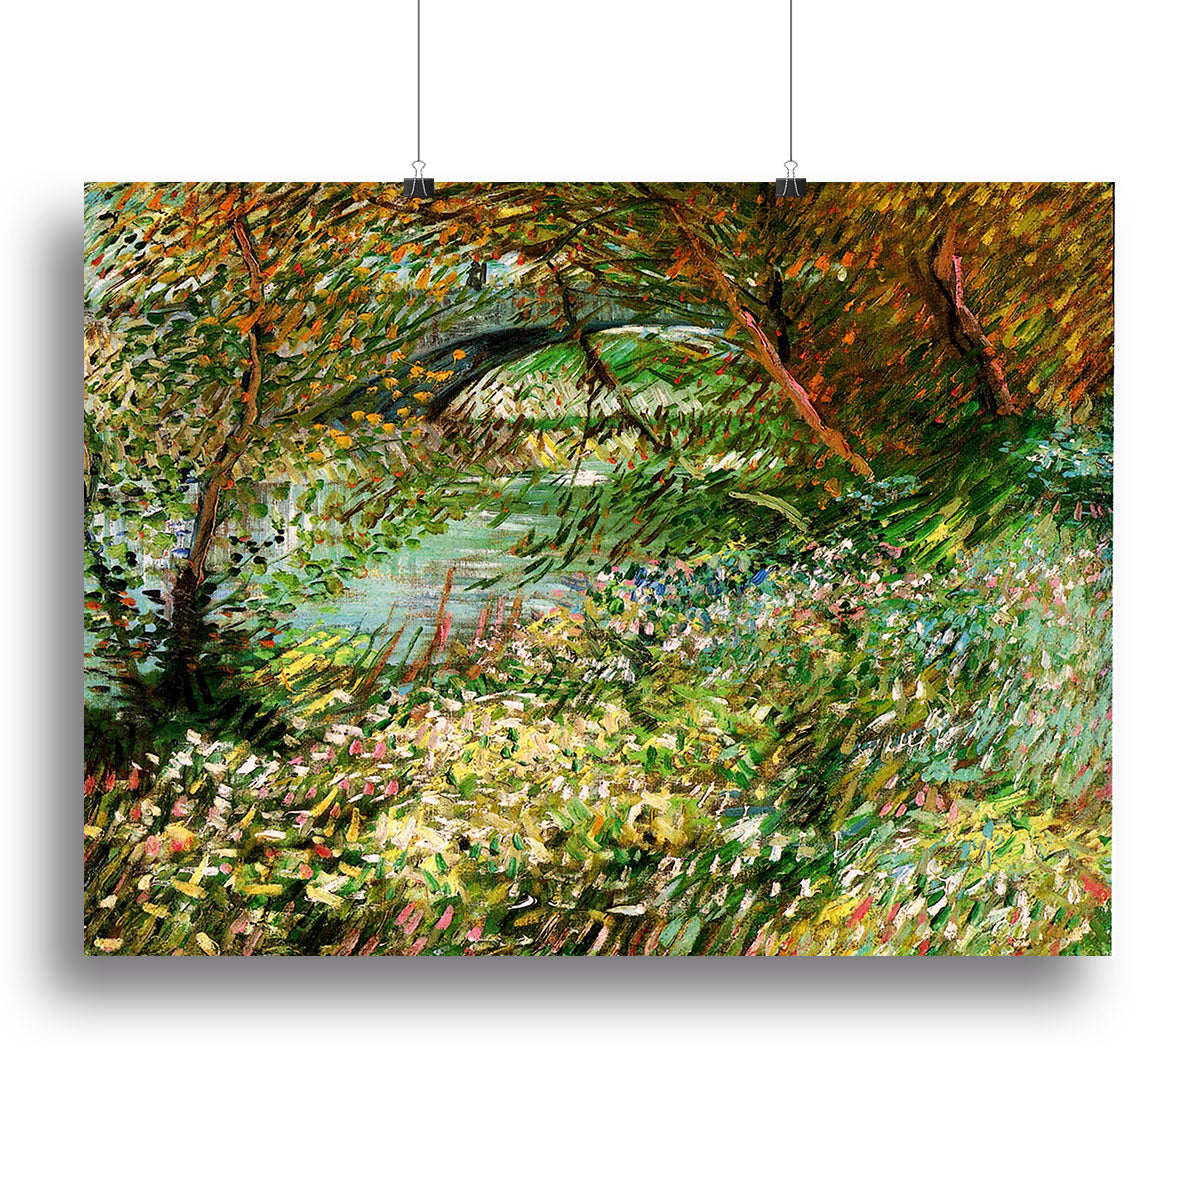 Banks of the Seine with Pont de Clichy in the Spring by Van Gogh Canvas Print or Poster - Canvas Art Rocks - 2